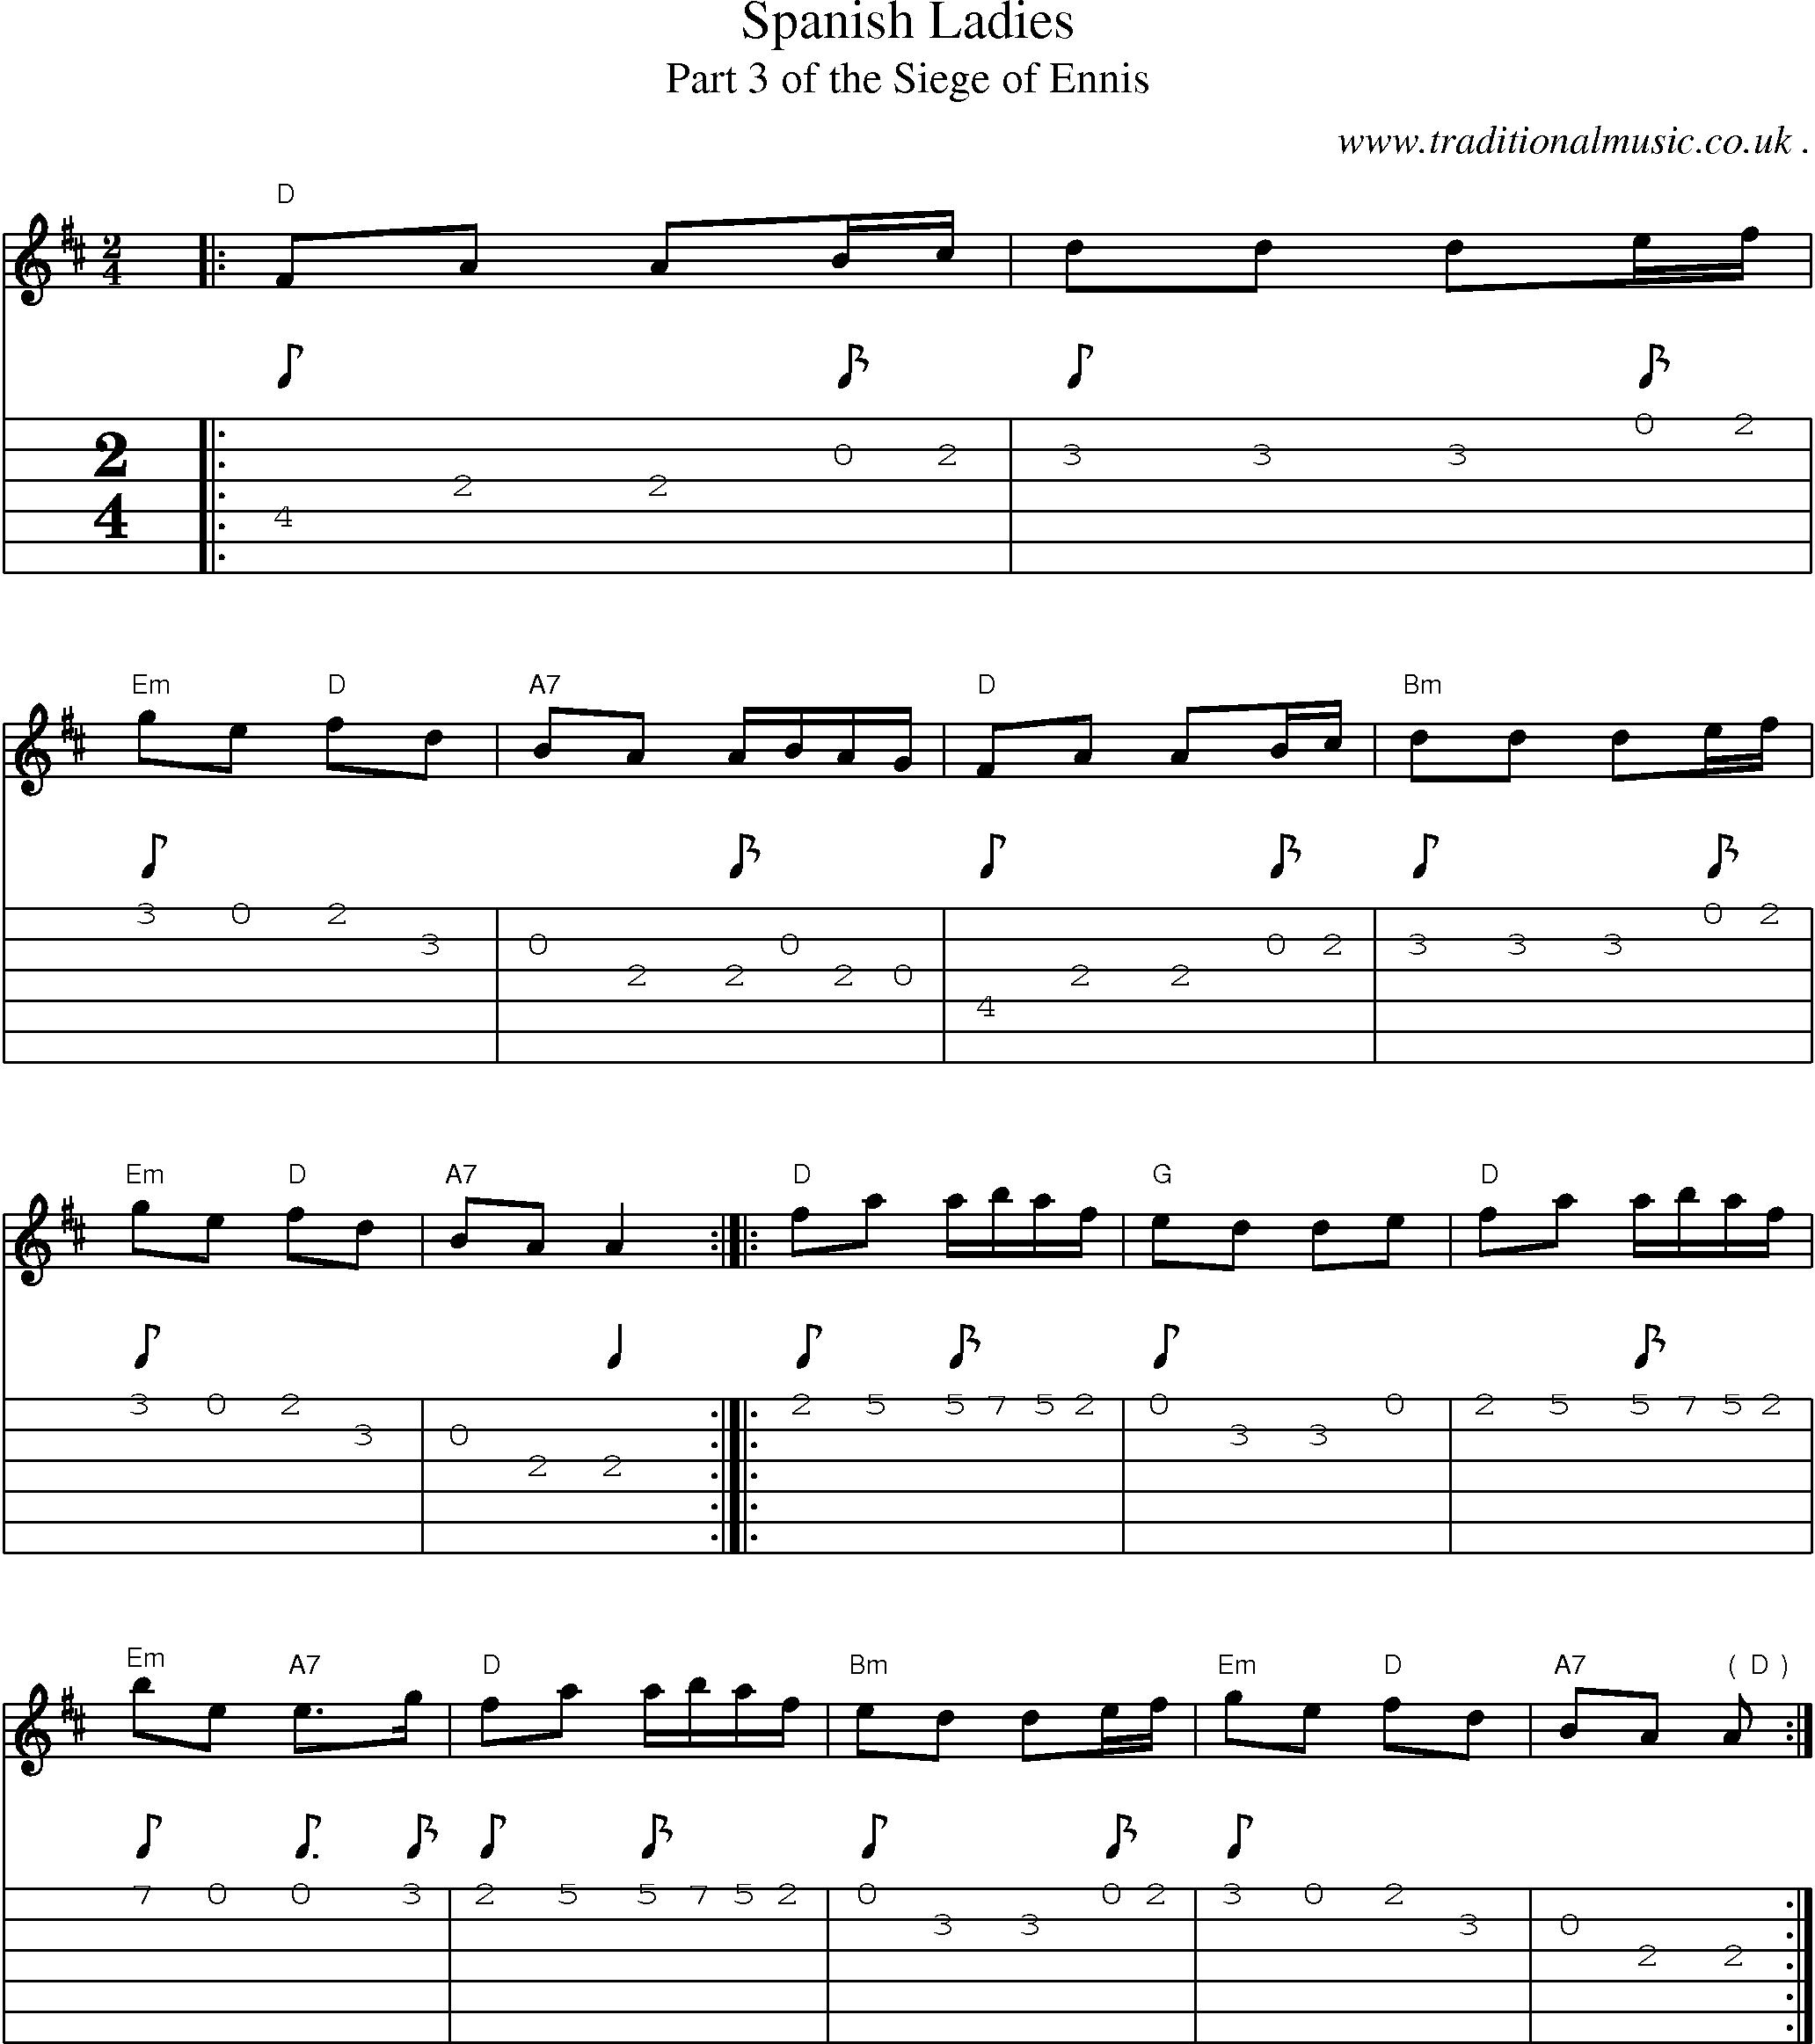 Music Score and Guitar Tabs for Spanish Ladies